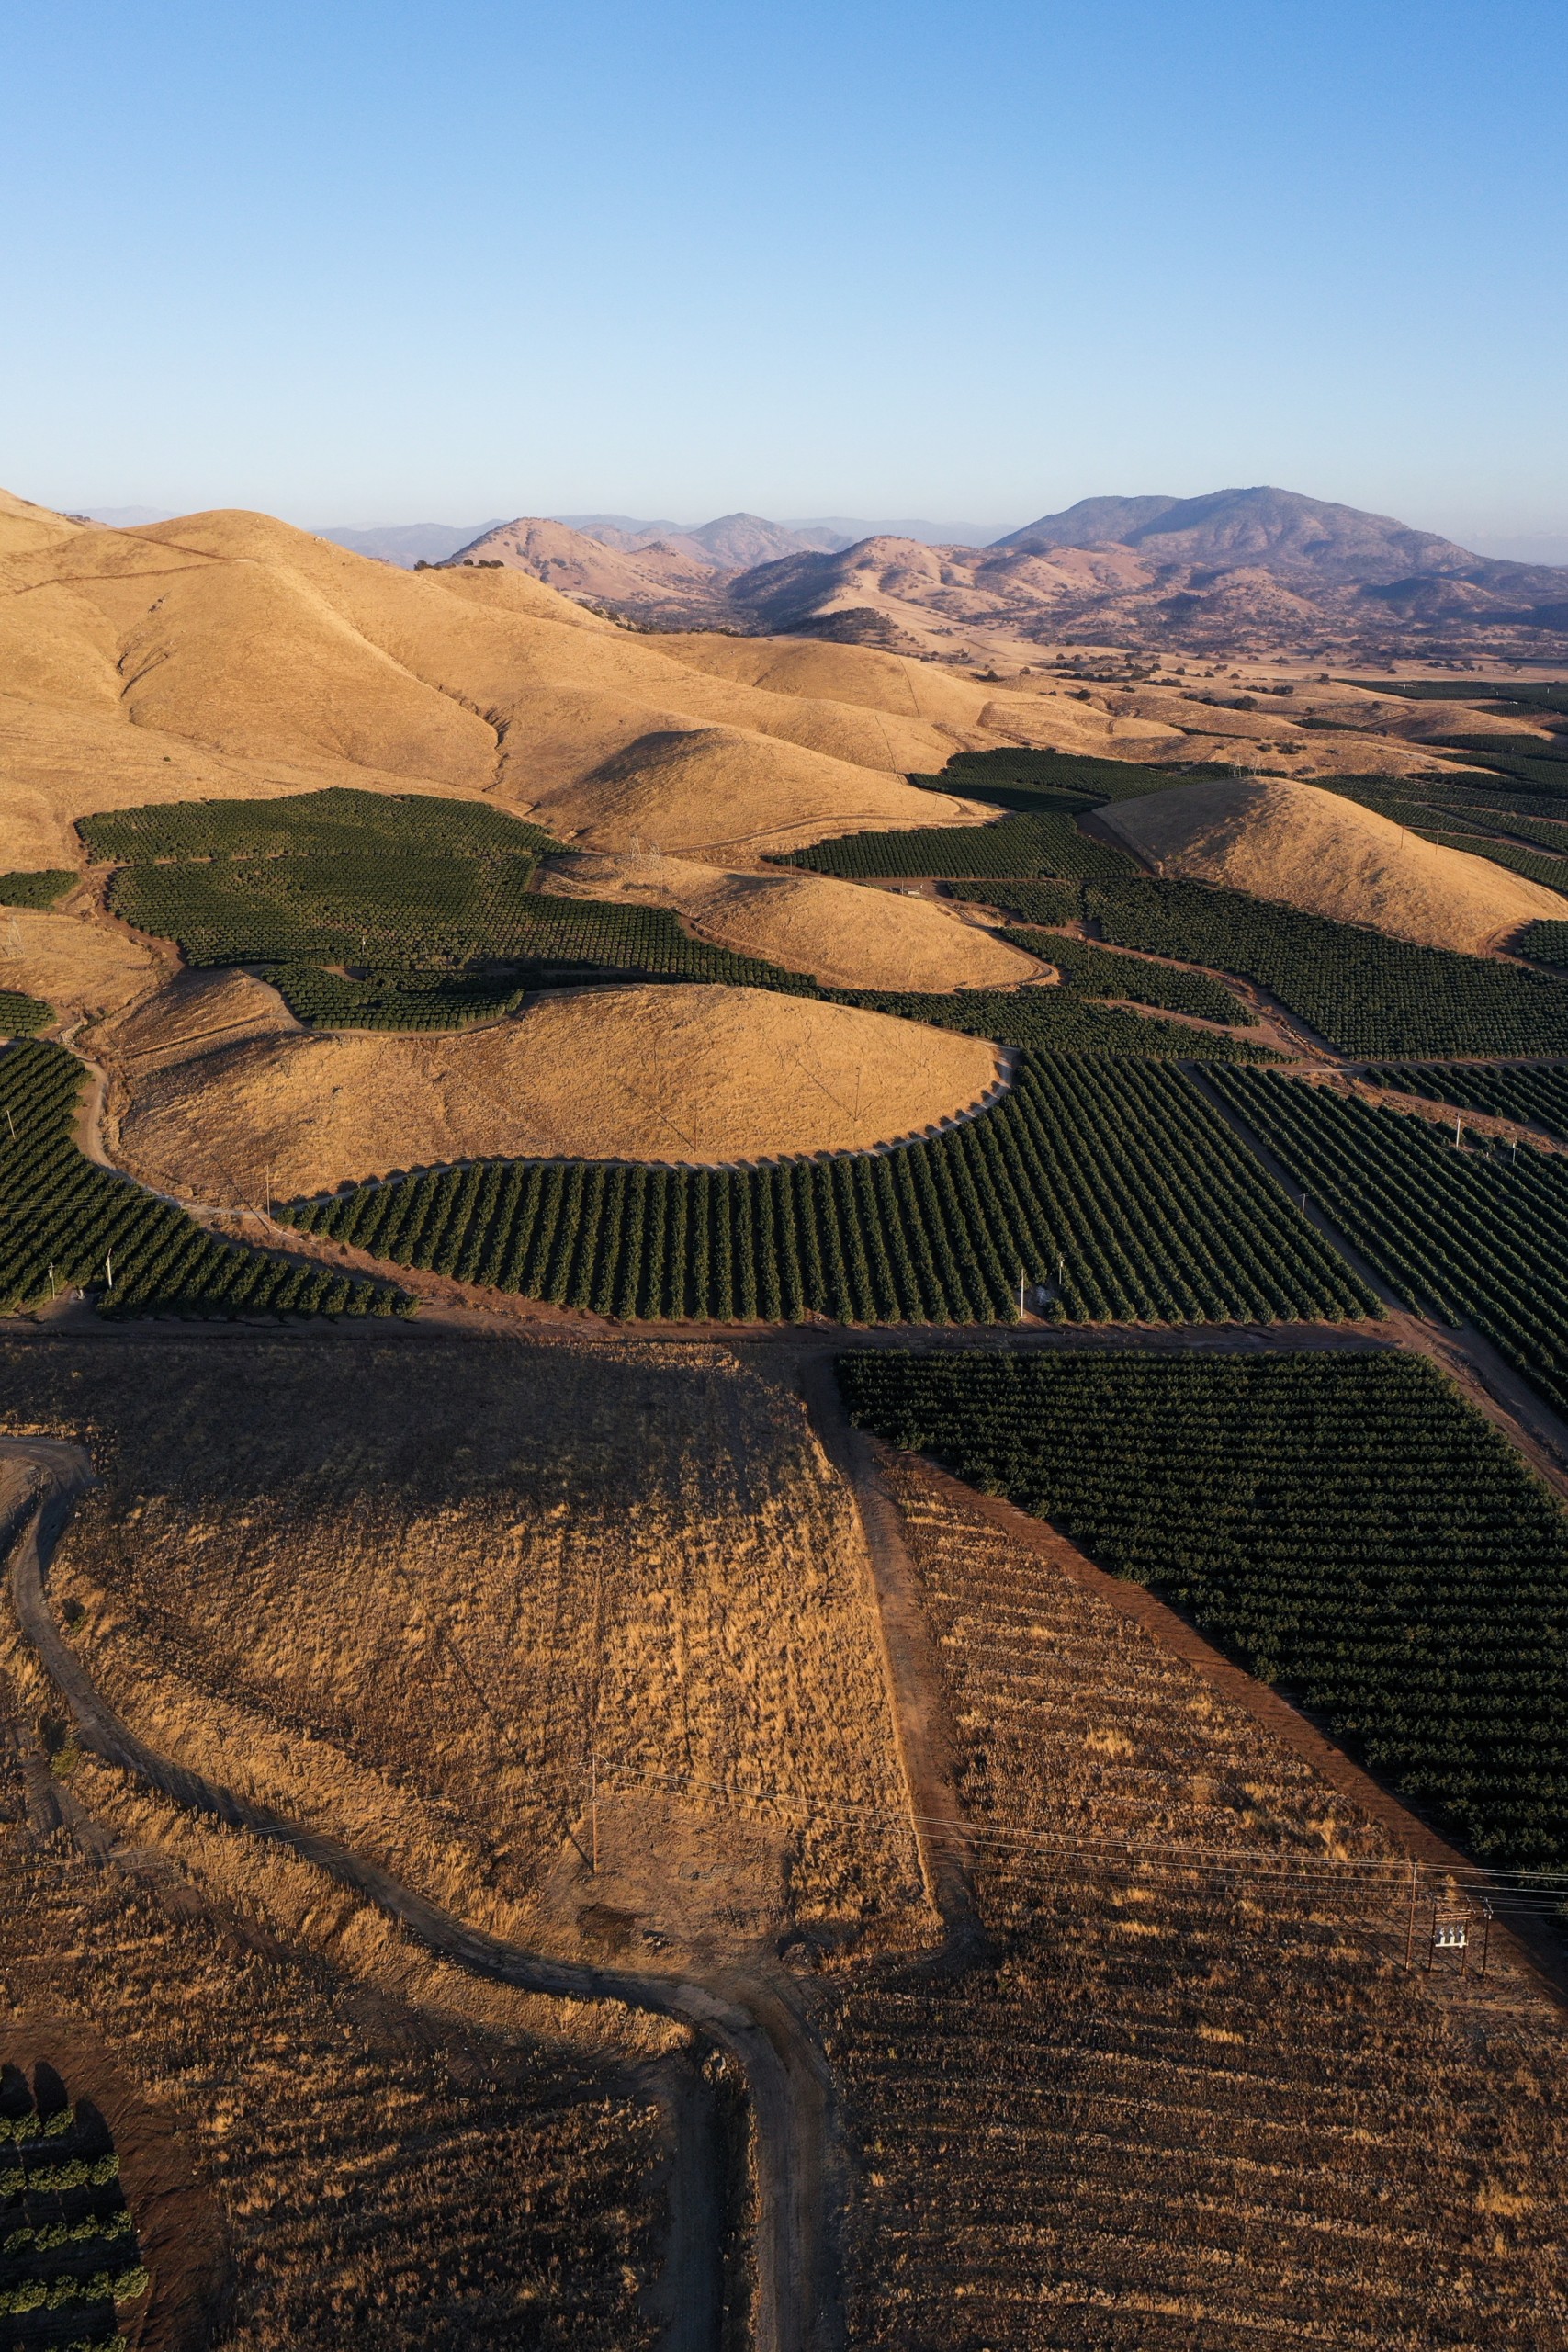 Orange groves in the golden foothills of the western Sierra Nevada mountains